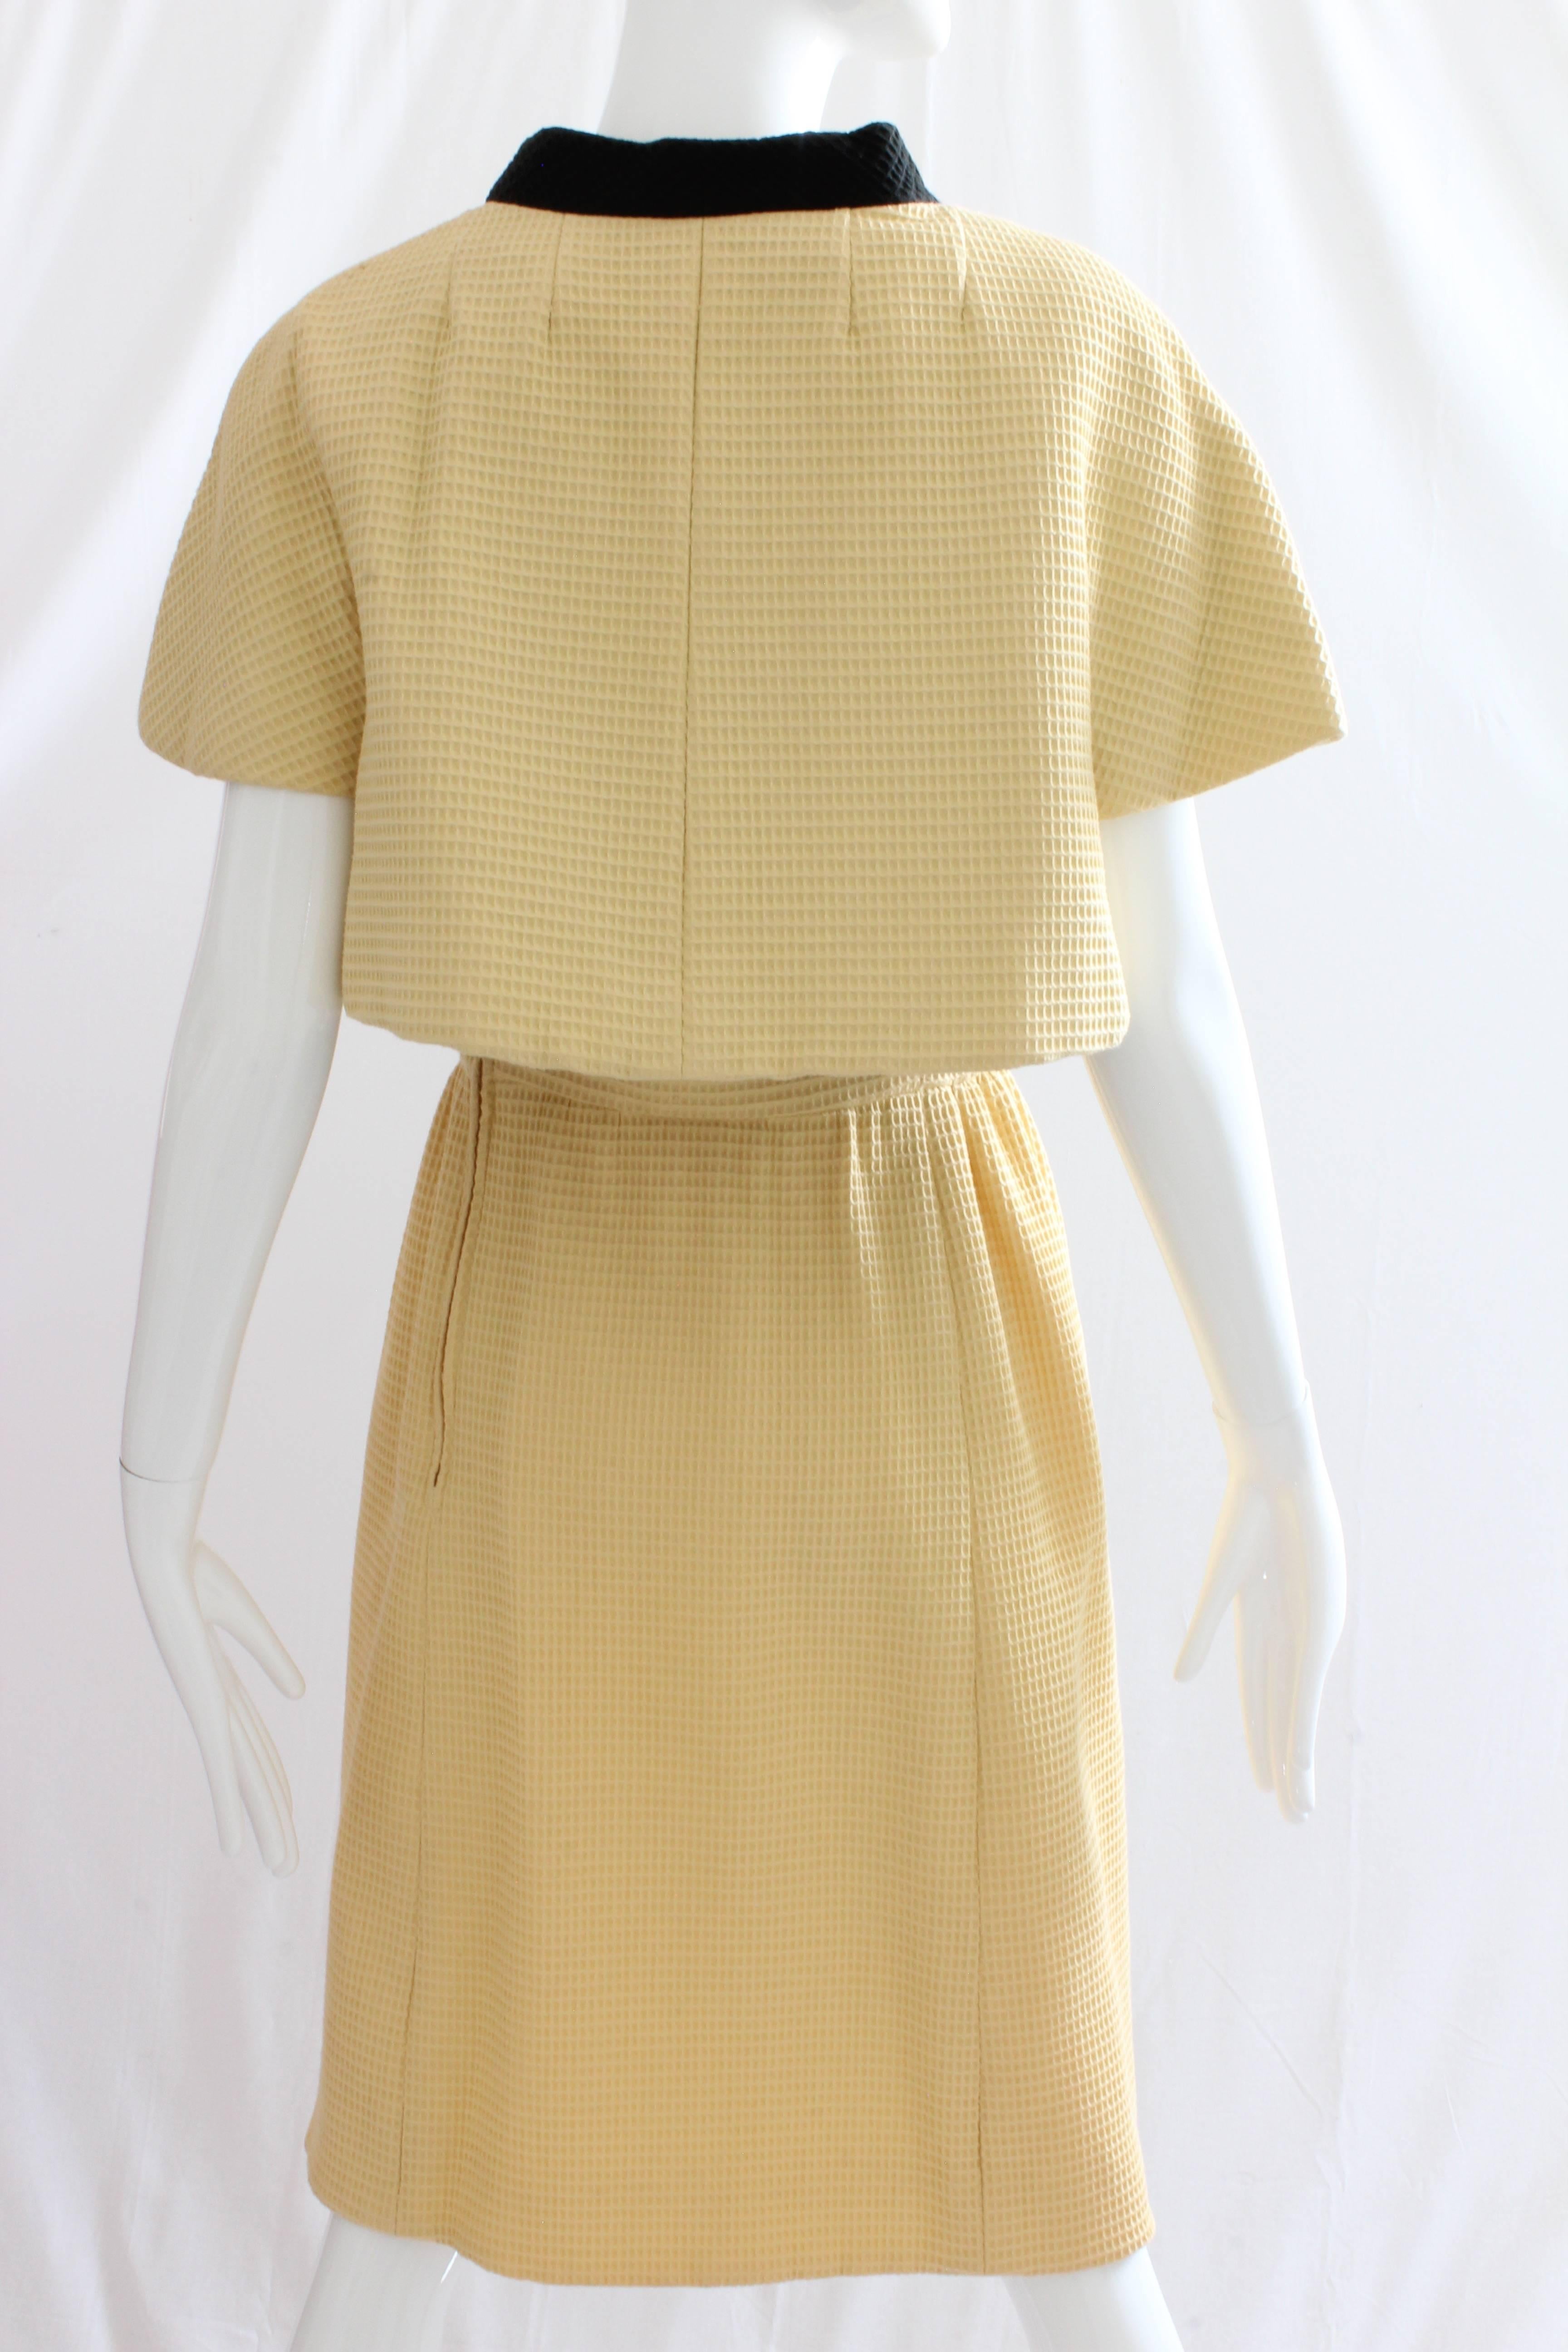 60s Chester Weinberg Jacket and Dress Ensemble 2pc Set Yellow Honeycomb Fabric S In Good Condition In Port Saint Lucie, FL